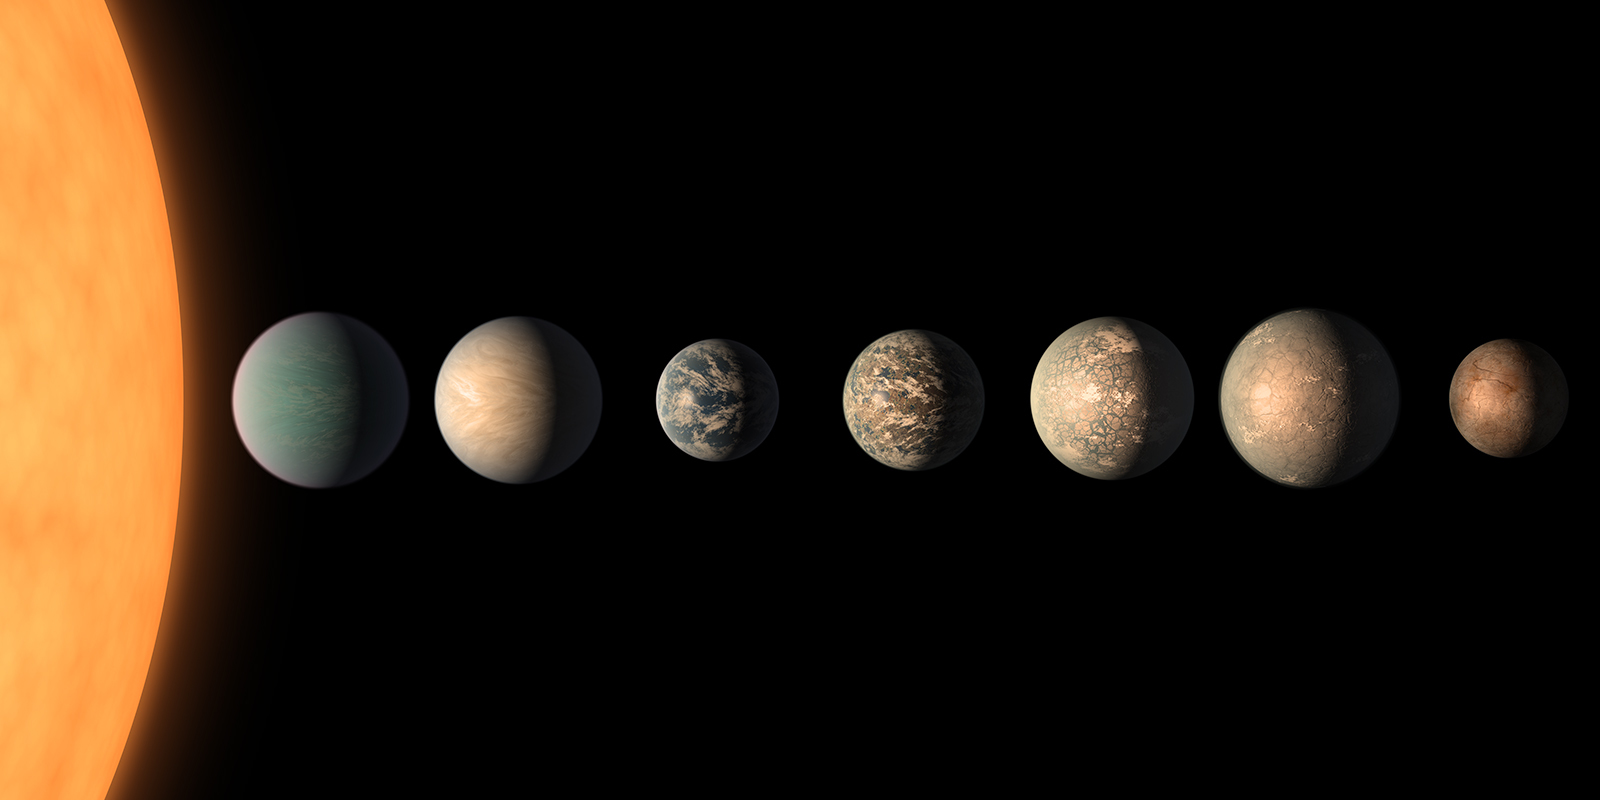 An artist's depiction of the seven planets in the TRAPPIST-1 system.